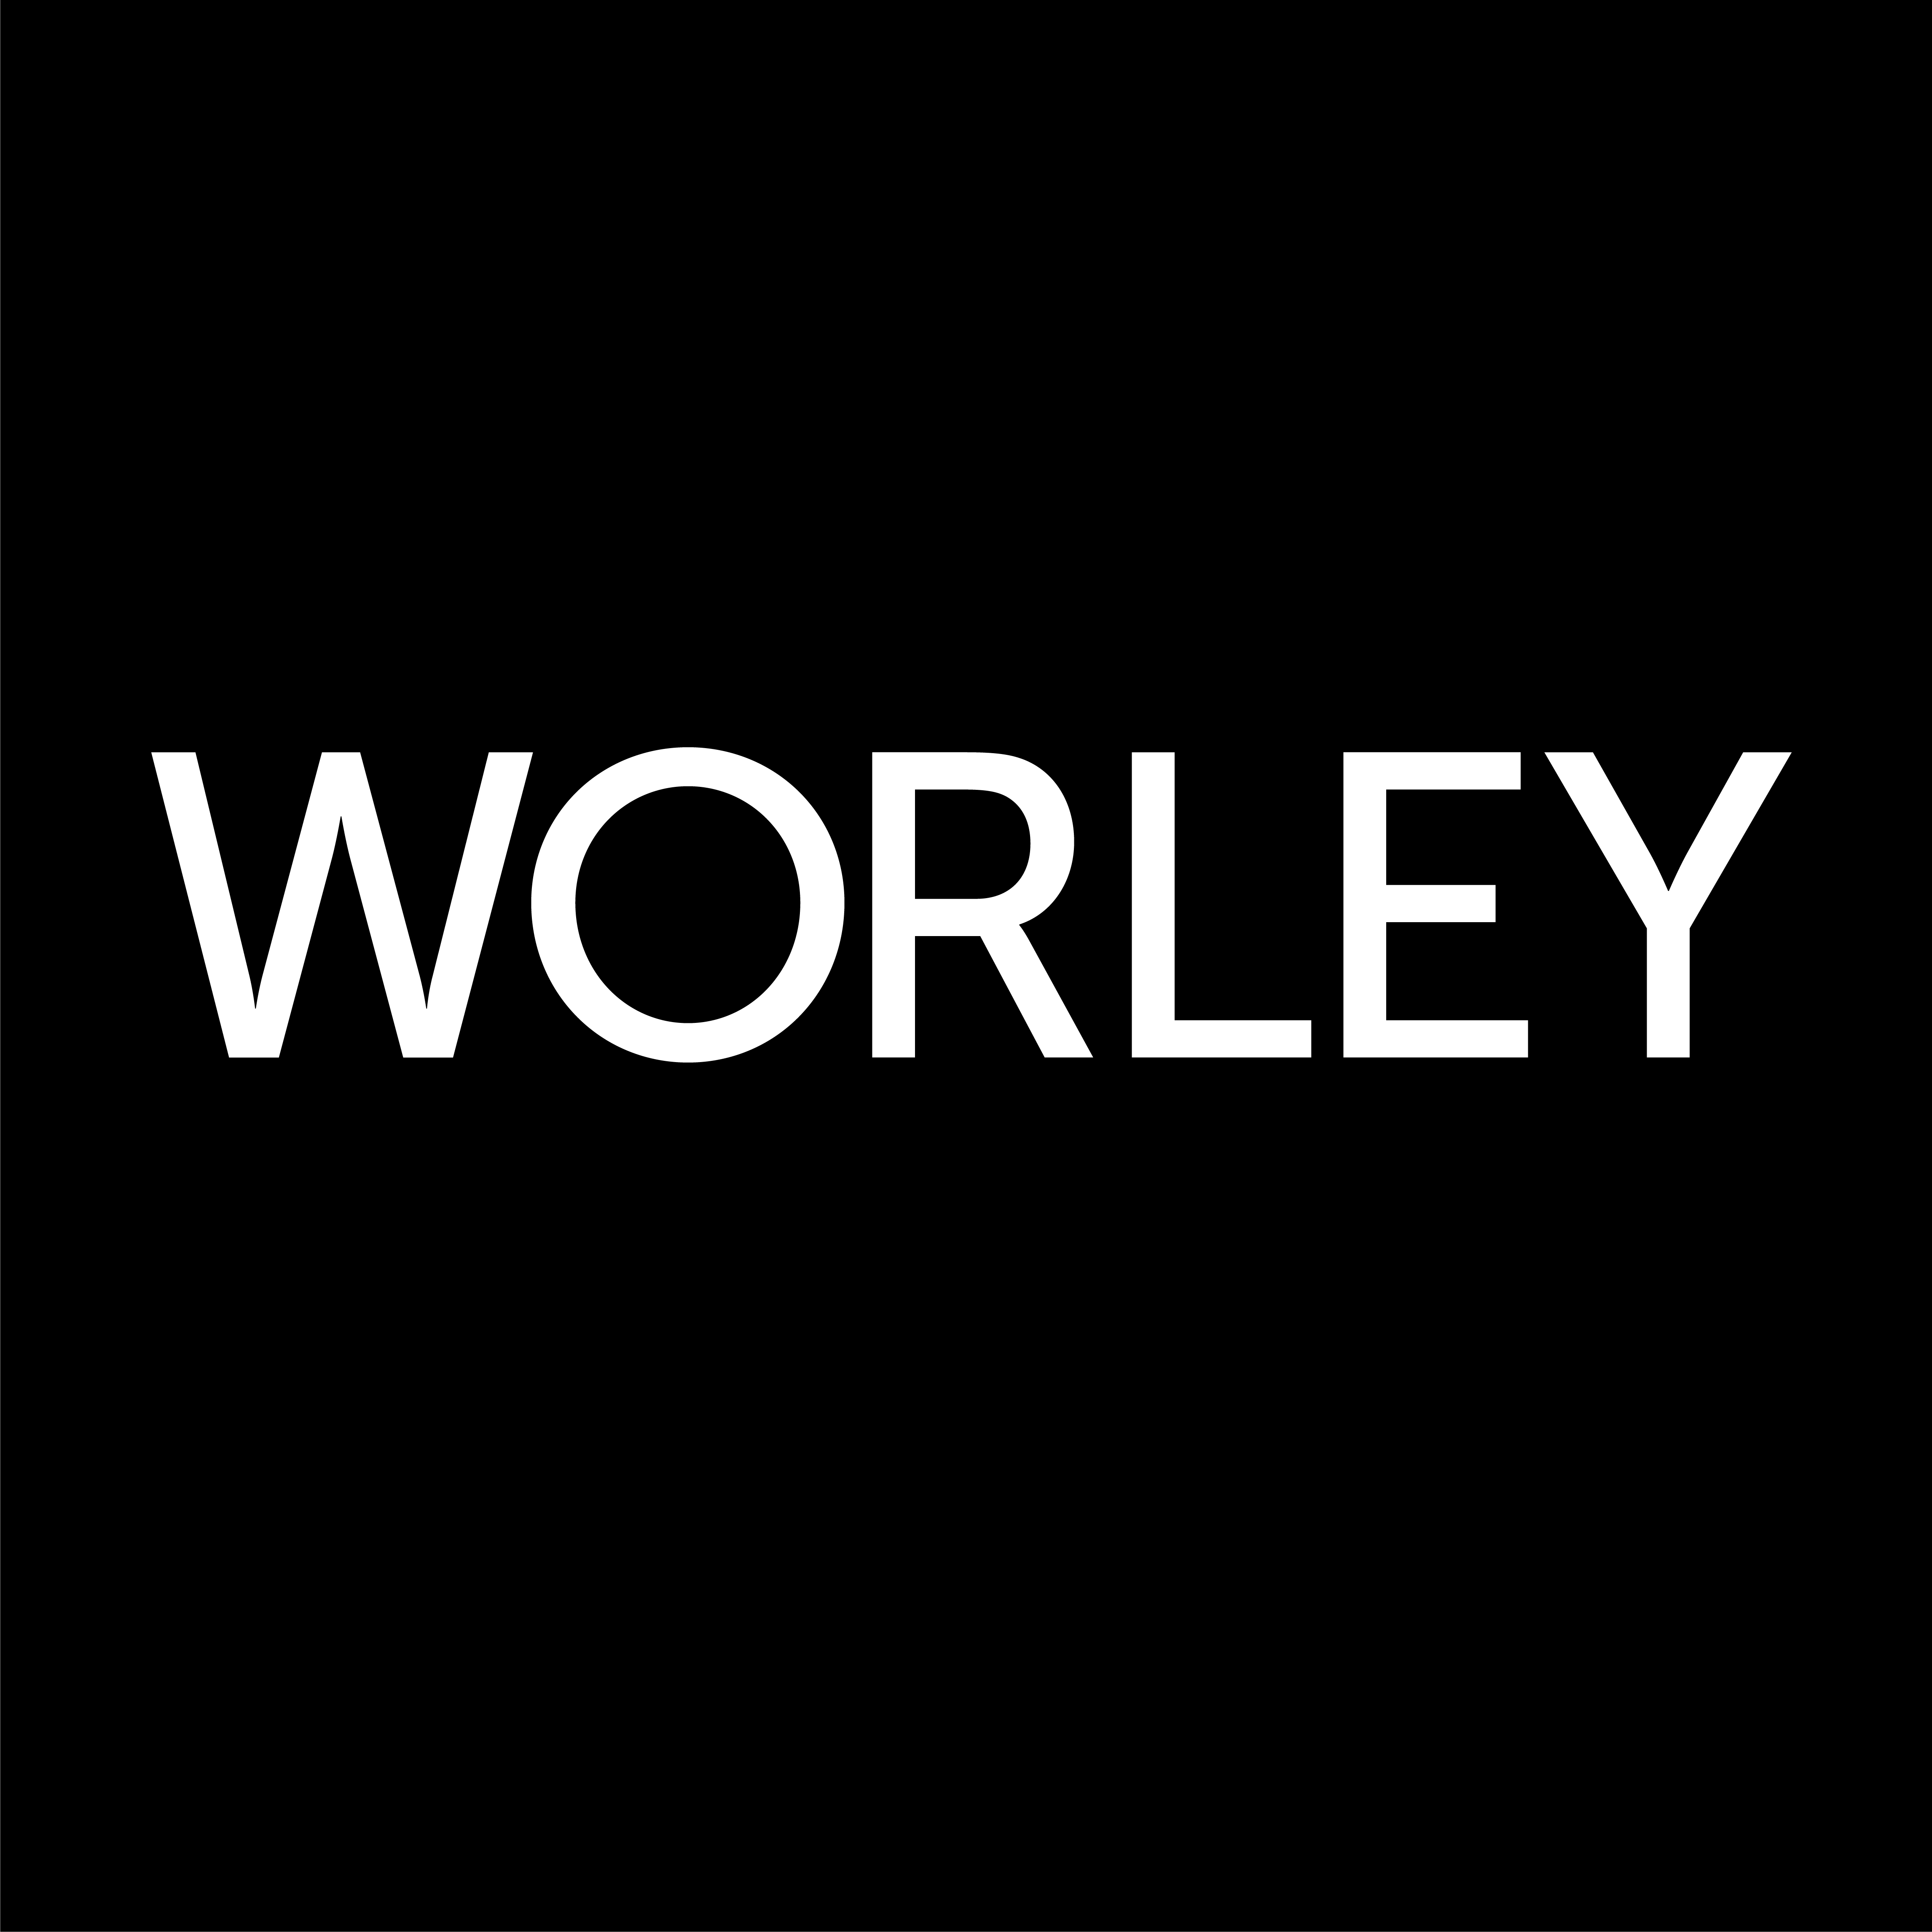 Worley, A Global Branding Firm profile on Qualified.One